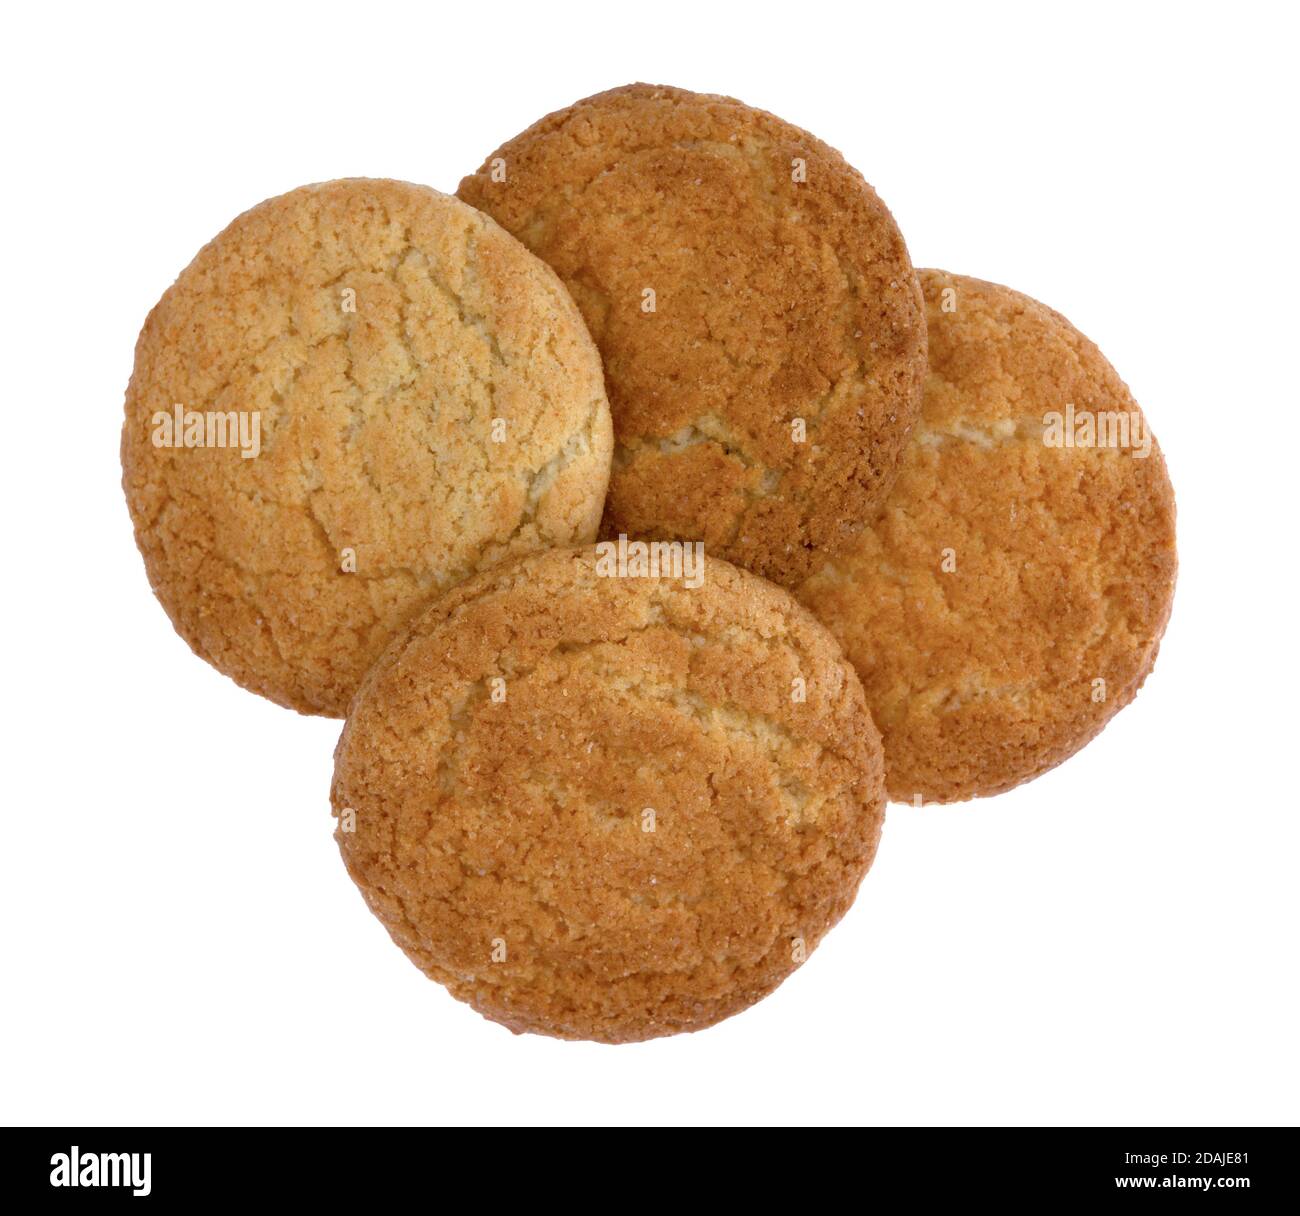 Top view of four coconut flavor cookies arranged and isolated on a white background. Stock Photo